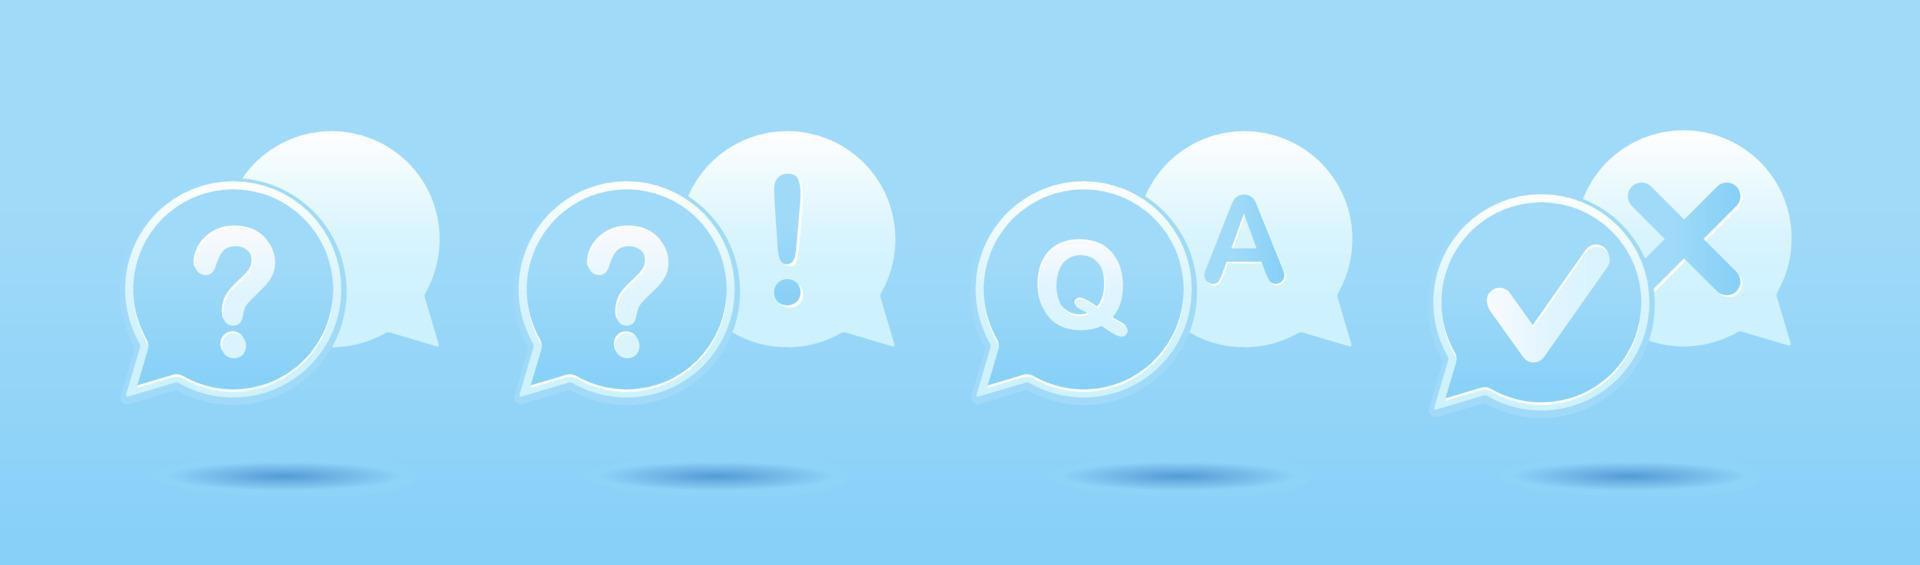 A set of three-dimensional 3d icons in the style of cut paper. Answers to questions, FAQ, support help, chat on a blue background vector